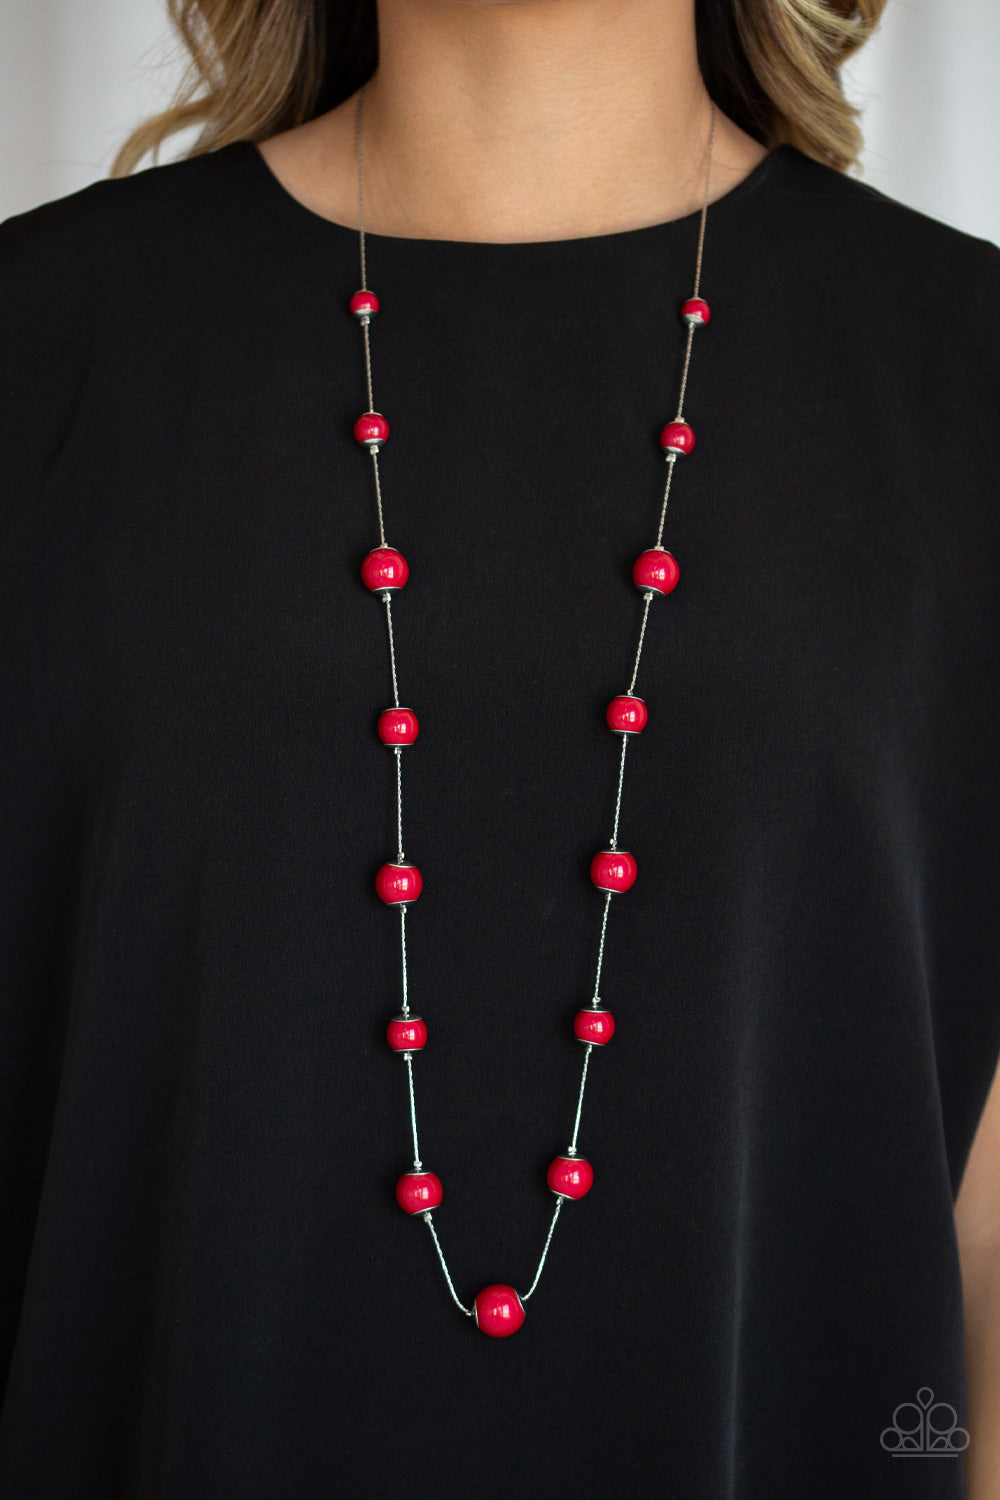 Paparazzi 5th Avenue Frenzy - Red Beads - Silver Necklace and matching Earrings - $5 Jewelry With Ashley Swint